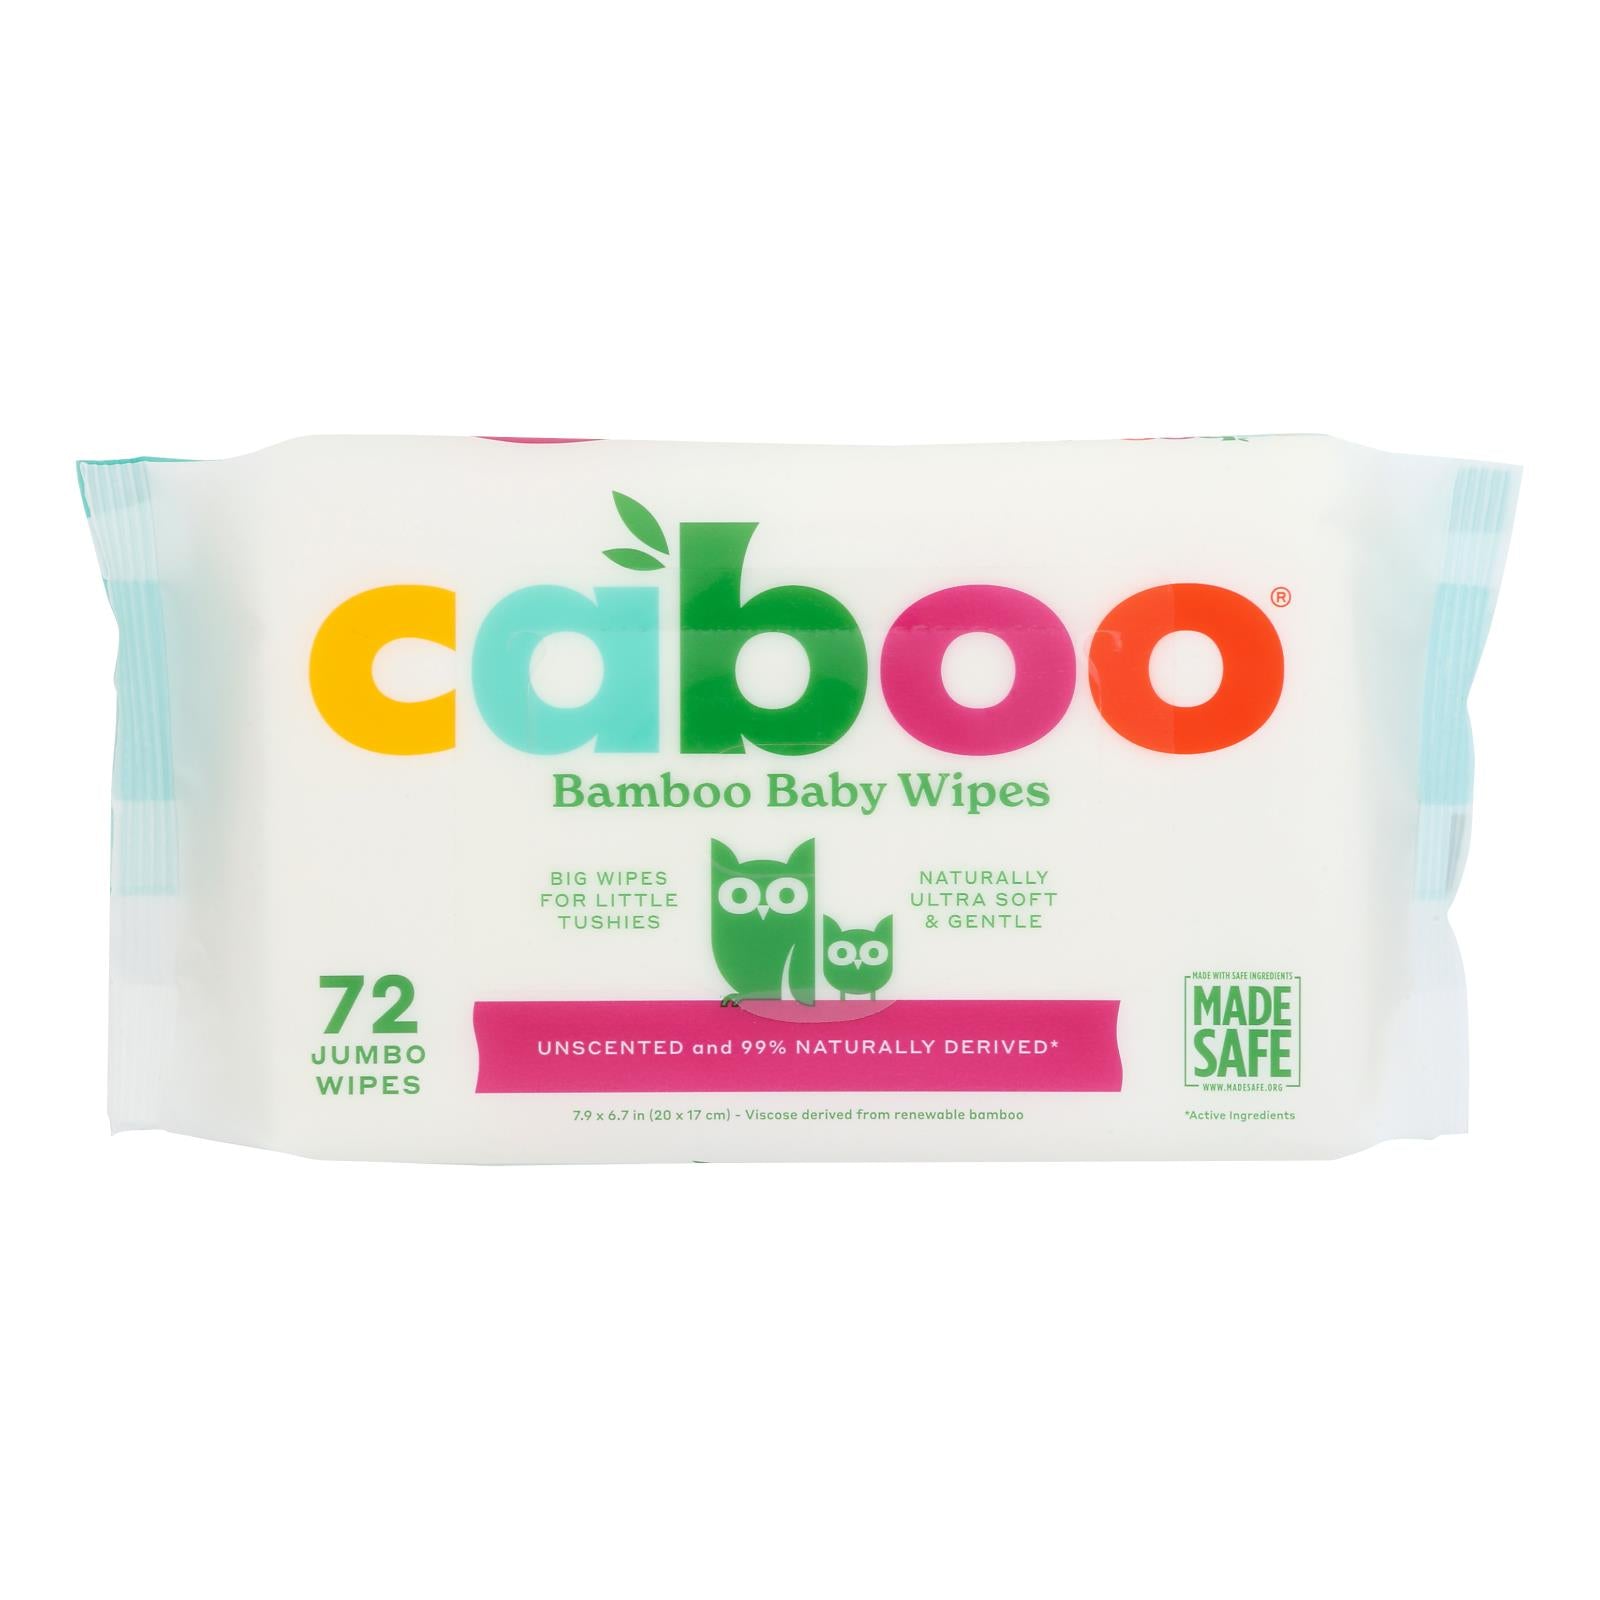 Caboo - Baby Wipes Bamboo 72 Count - Case Of 12-1 Count